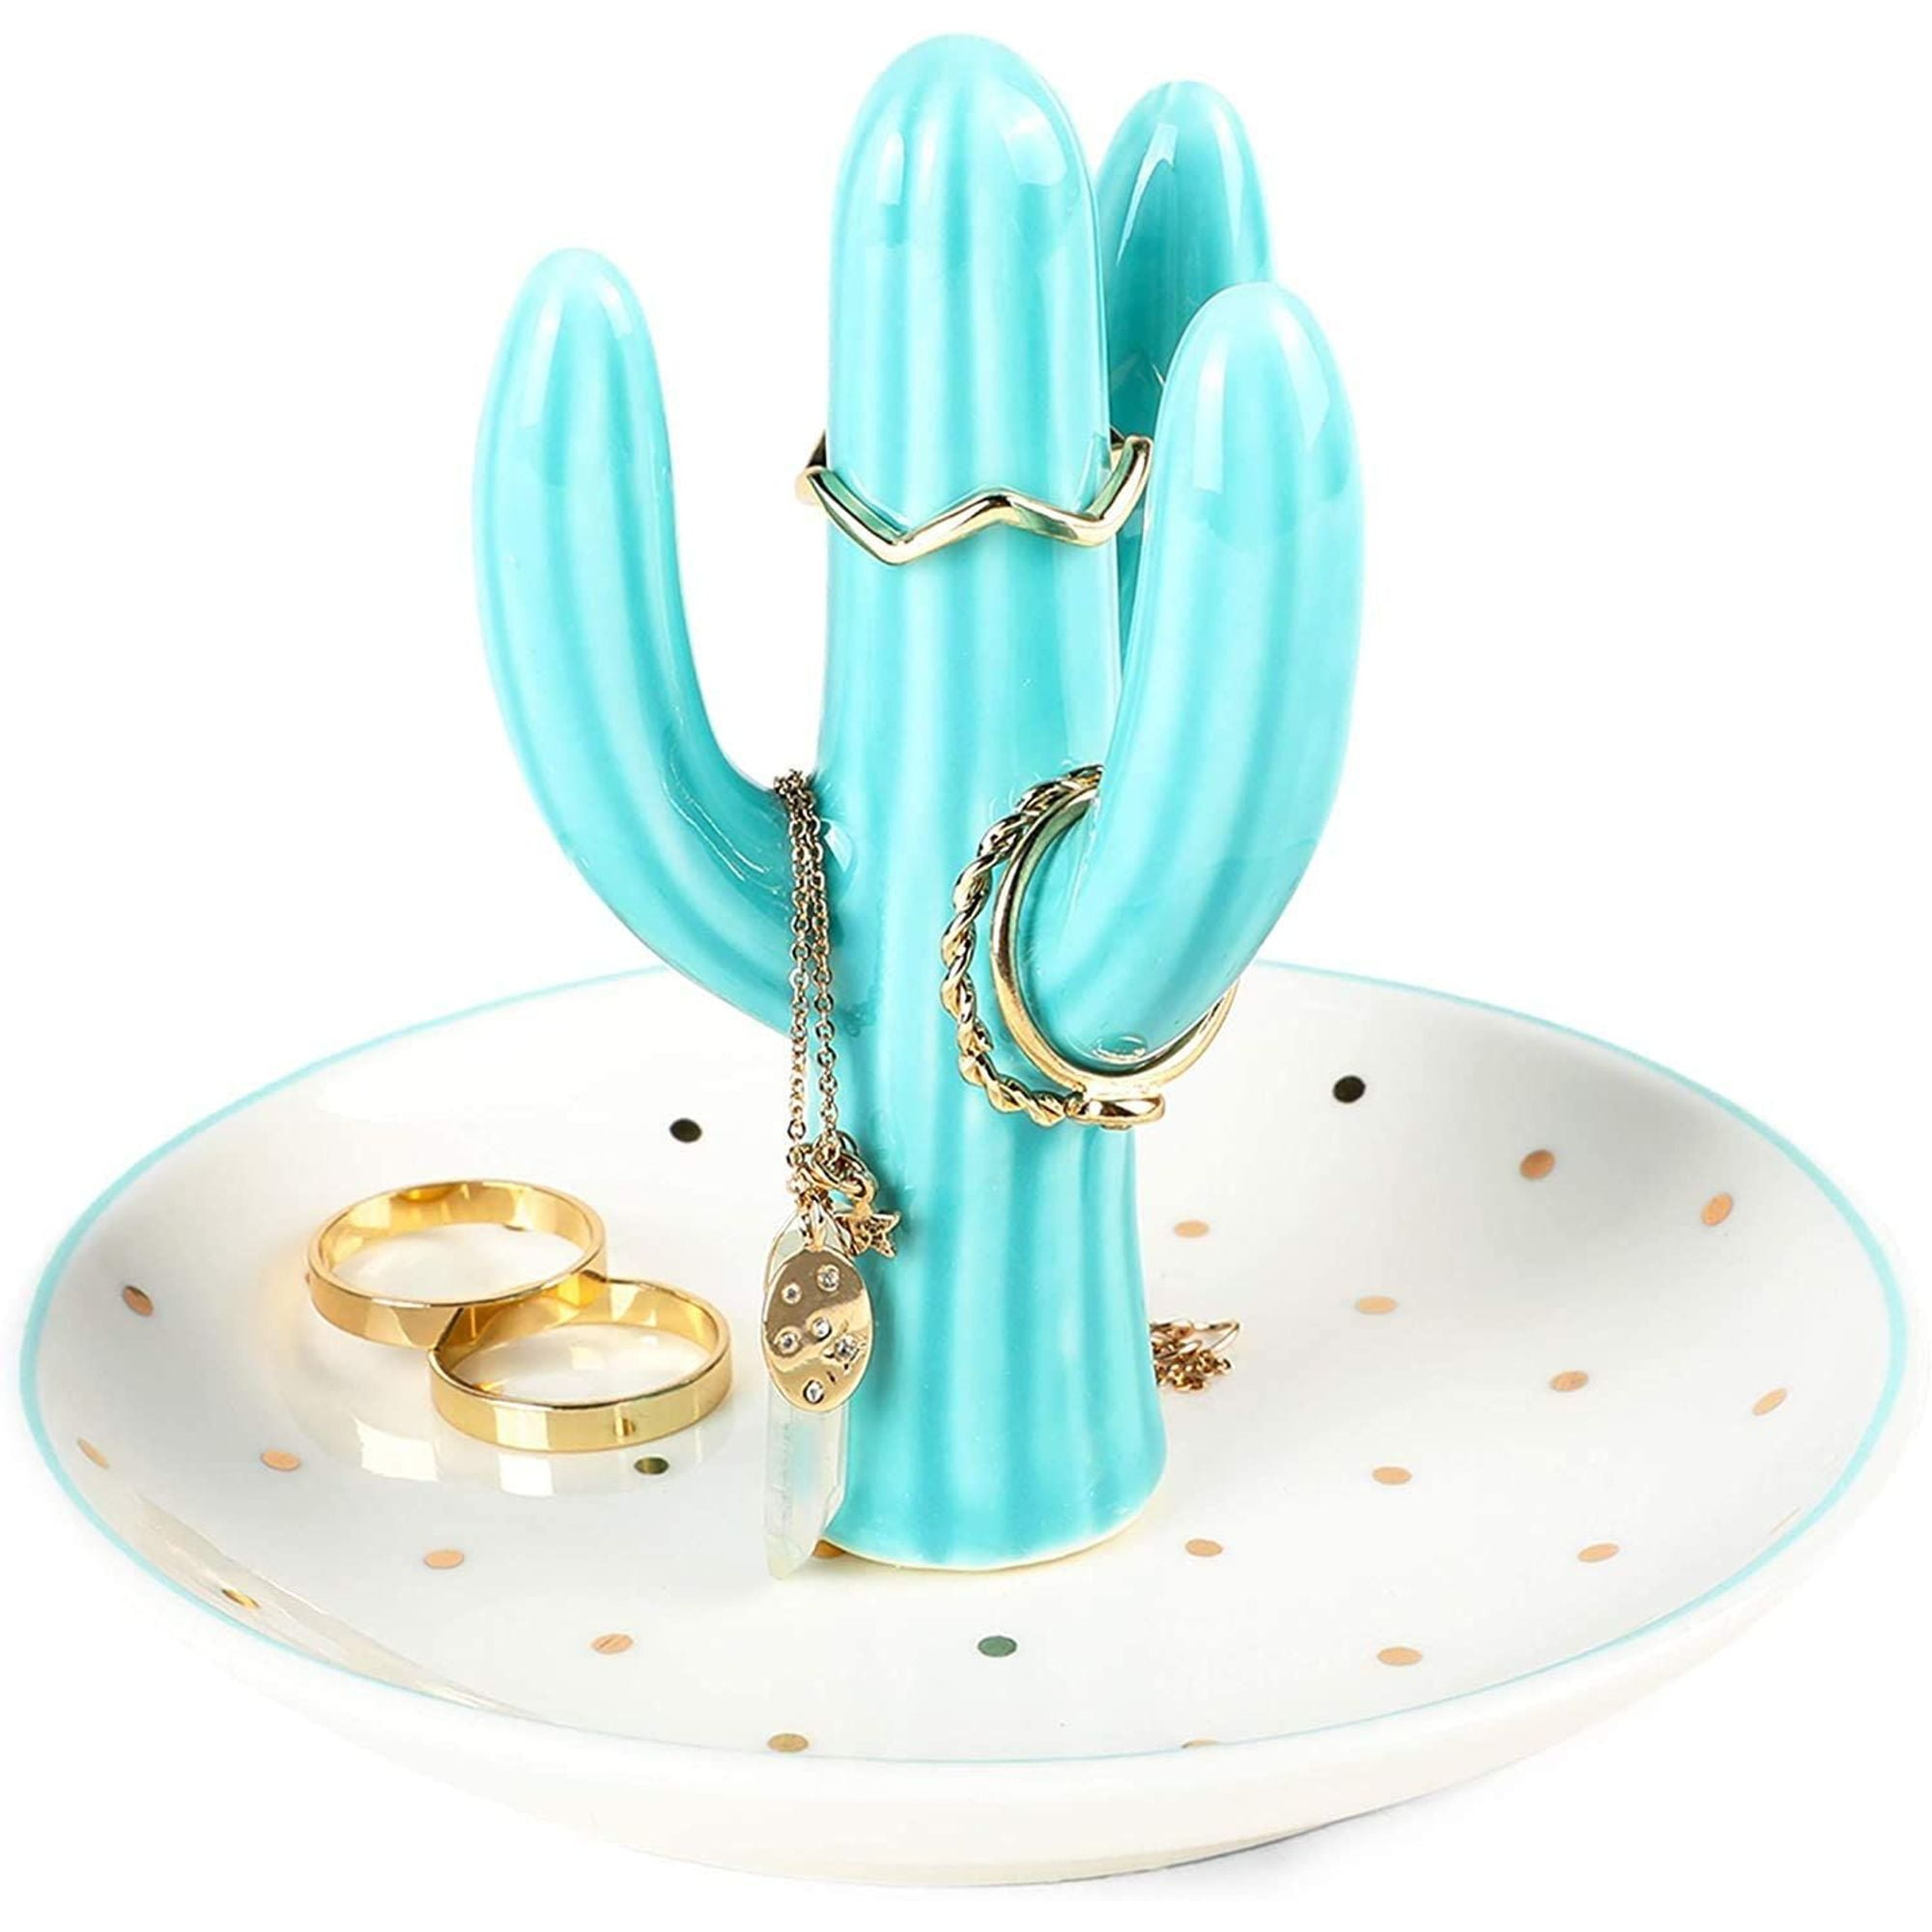 Owlgift Cactus Ring Holder Earring Trinket Tray Green Cactus Ceramic Dish for Jewelry Succulent Bracelet Storage Necklace Organizer Display